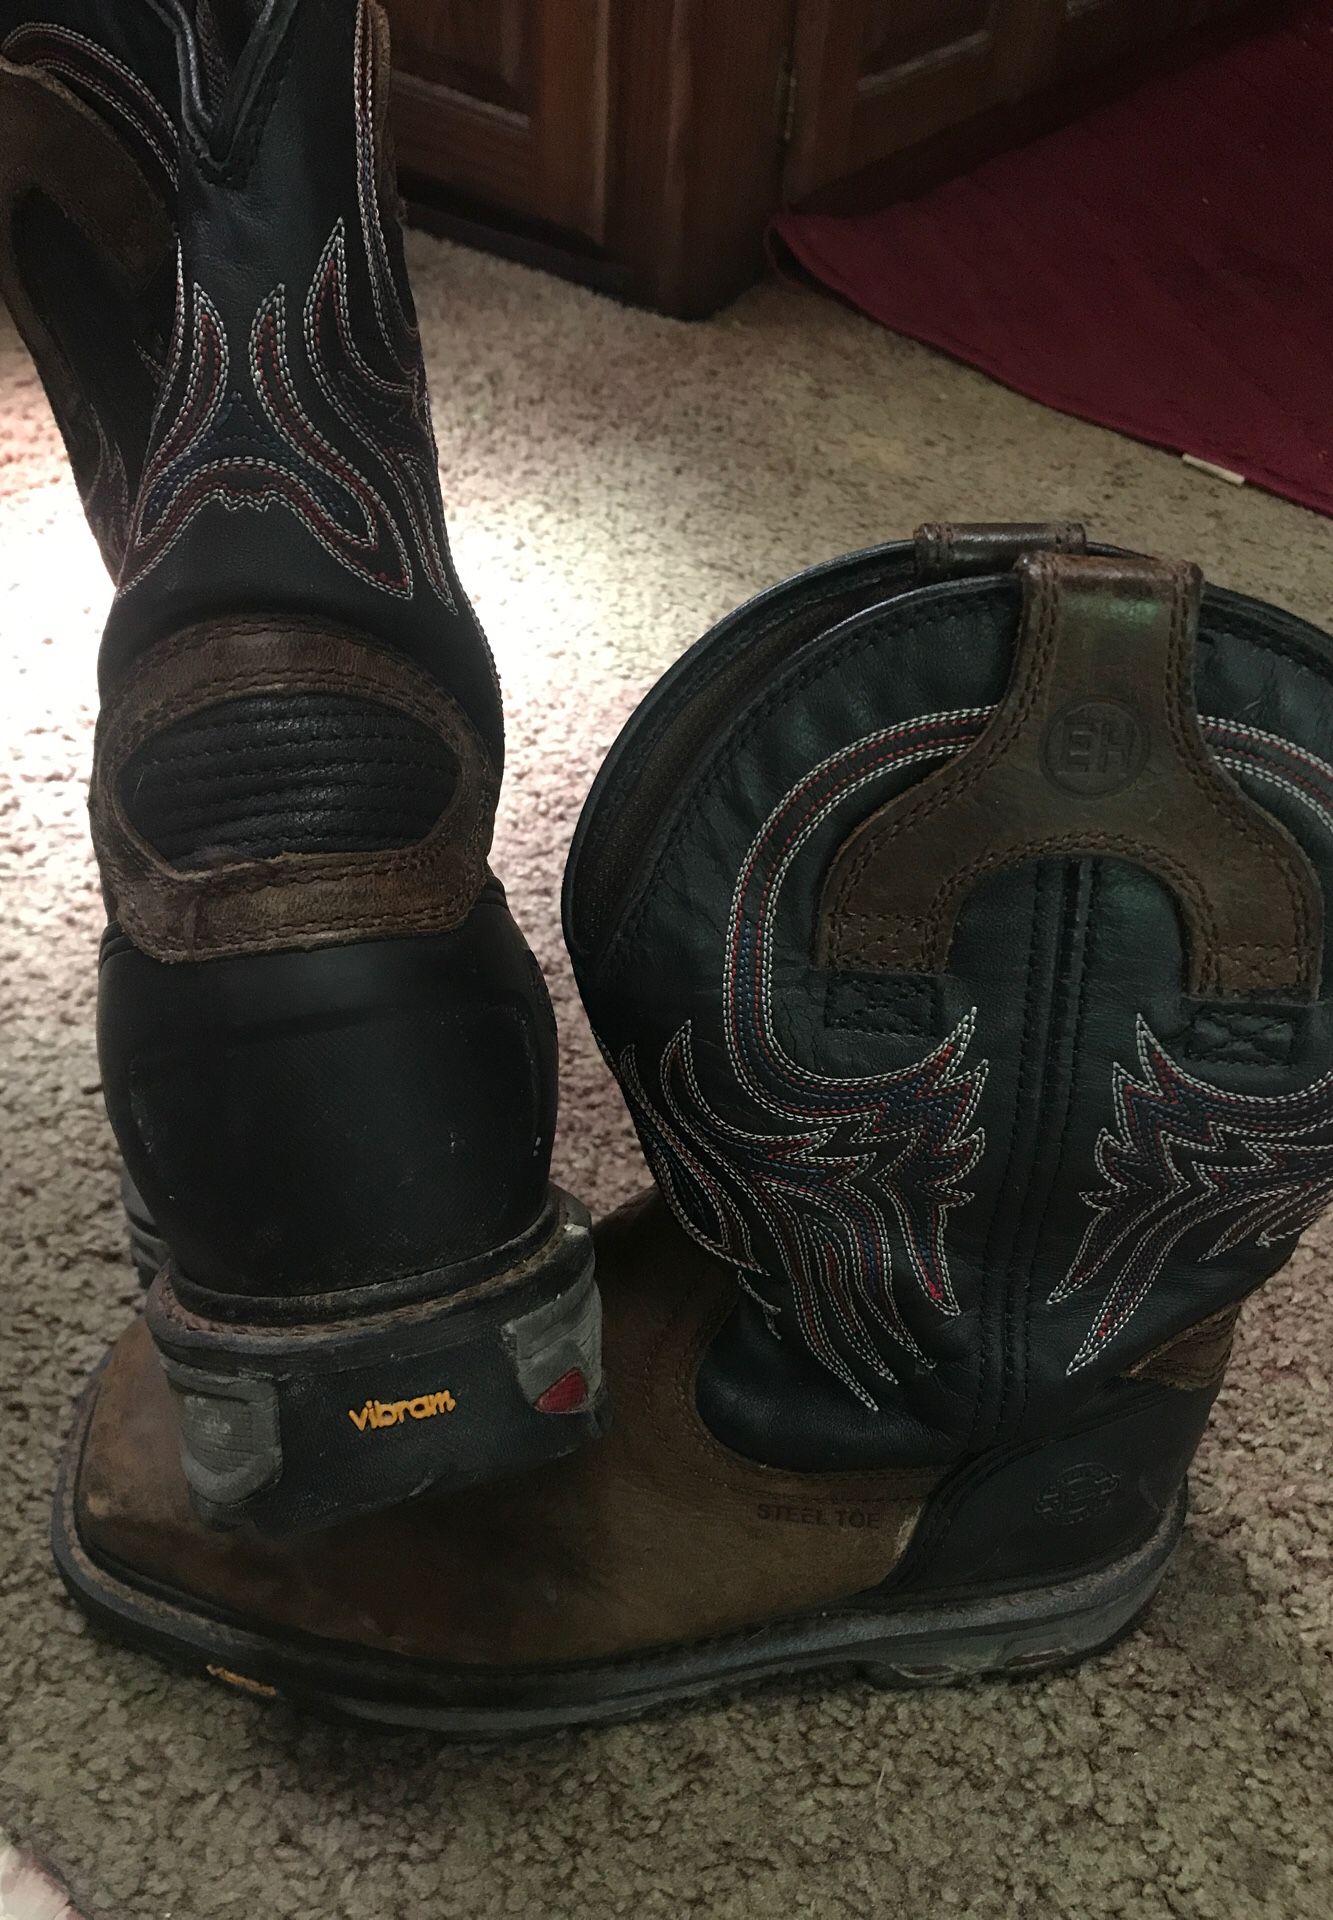 Justin work boots .. worn only a few times .